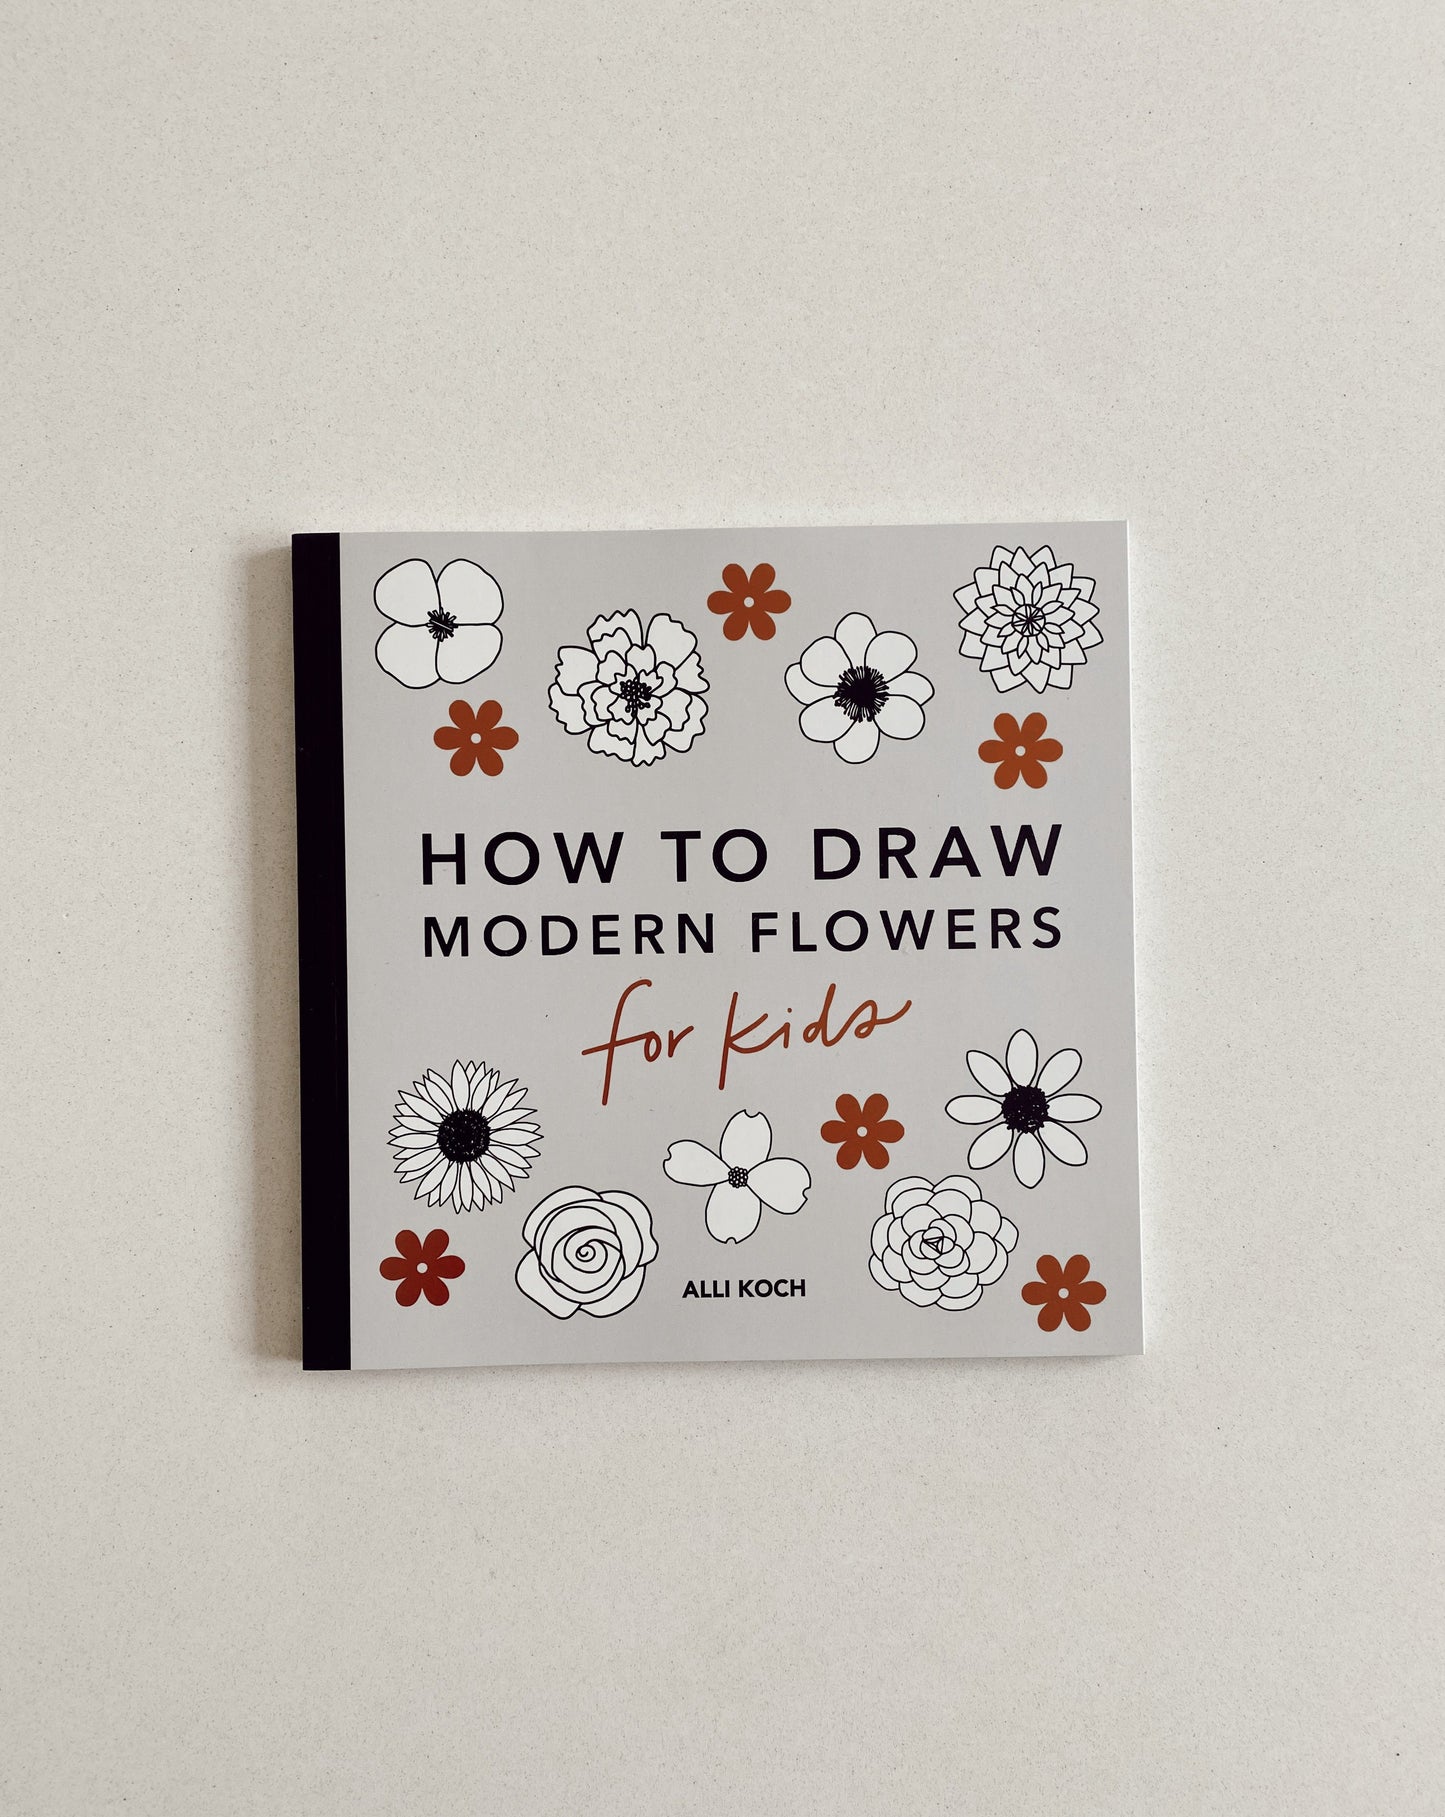 How to draw modern flowers for kids